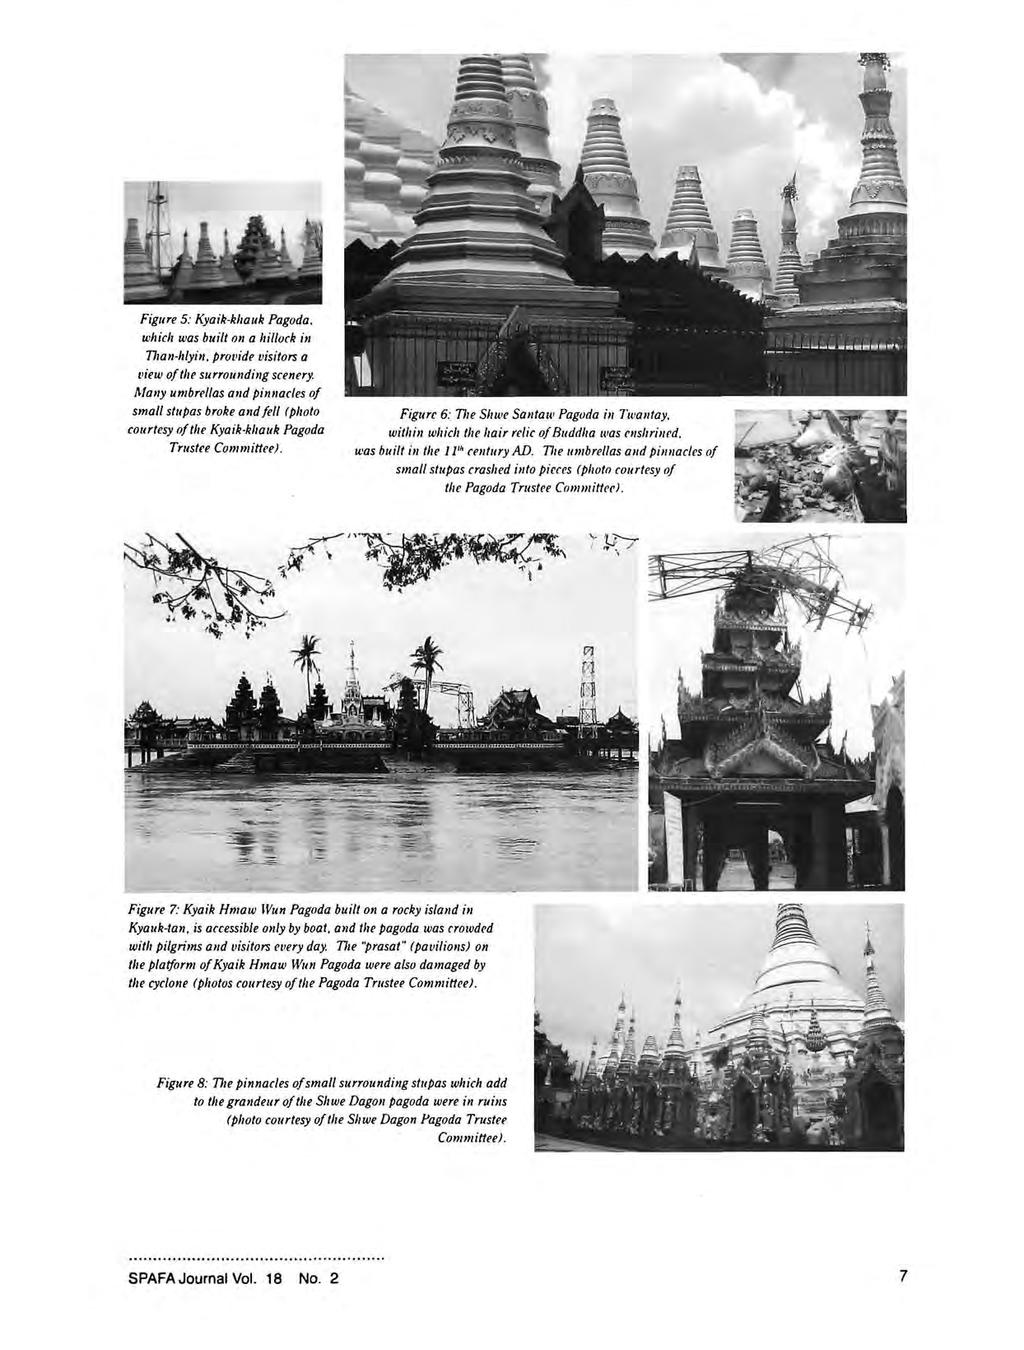 Figure 5. Kyaik-khauk Pagoda. which was built on a hillock in Tlian-hlyin. provide visitors a view of the surrounding scenery.